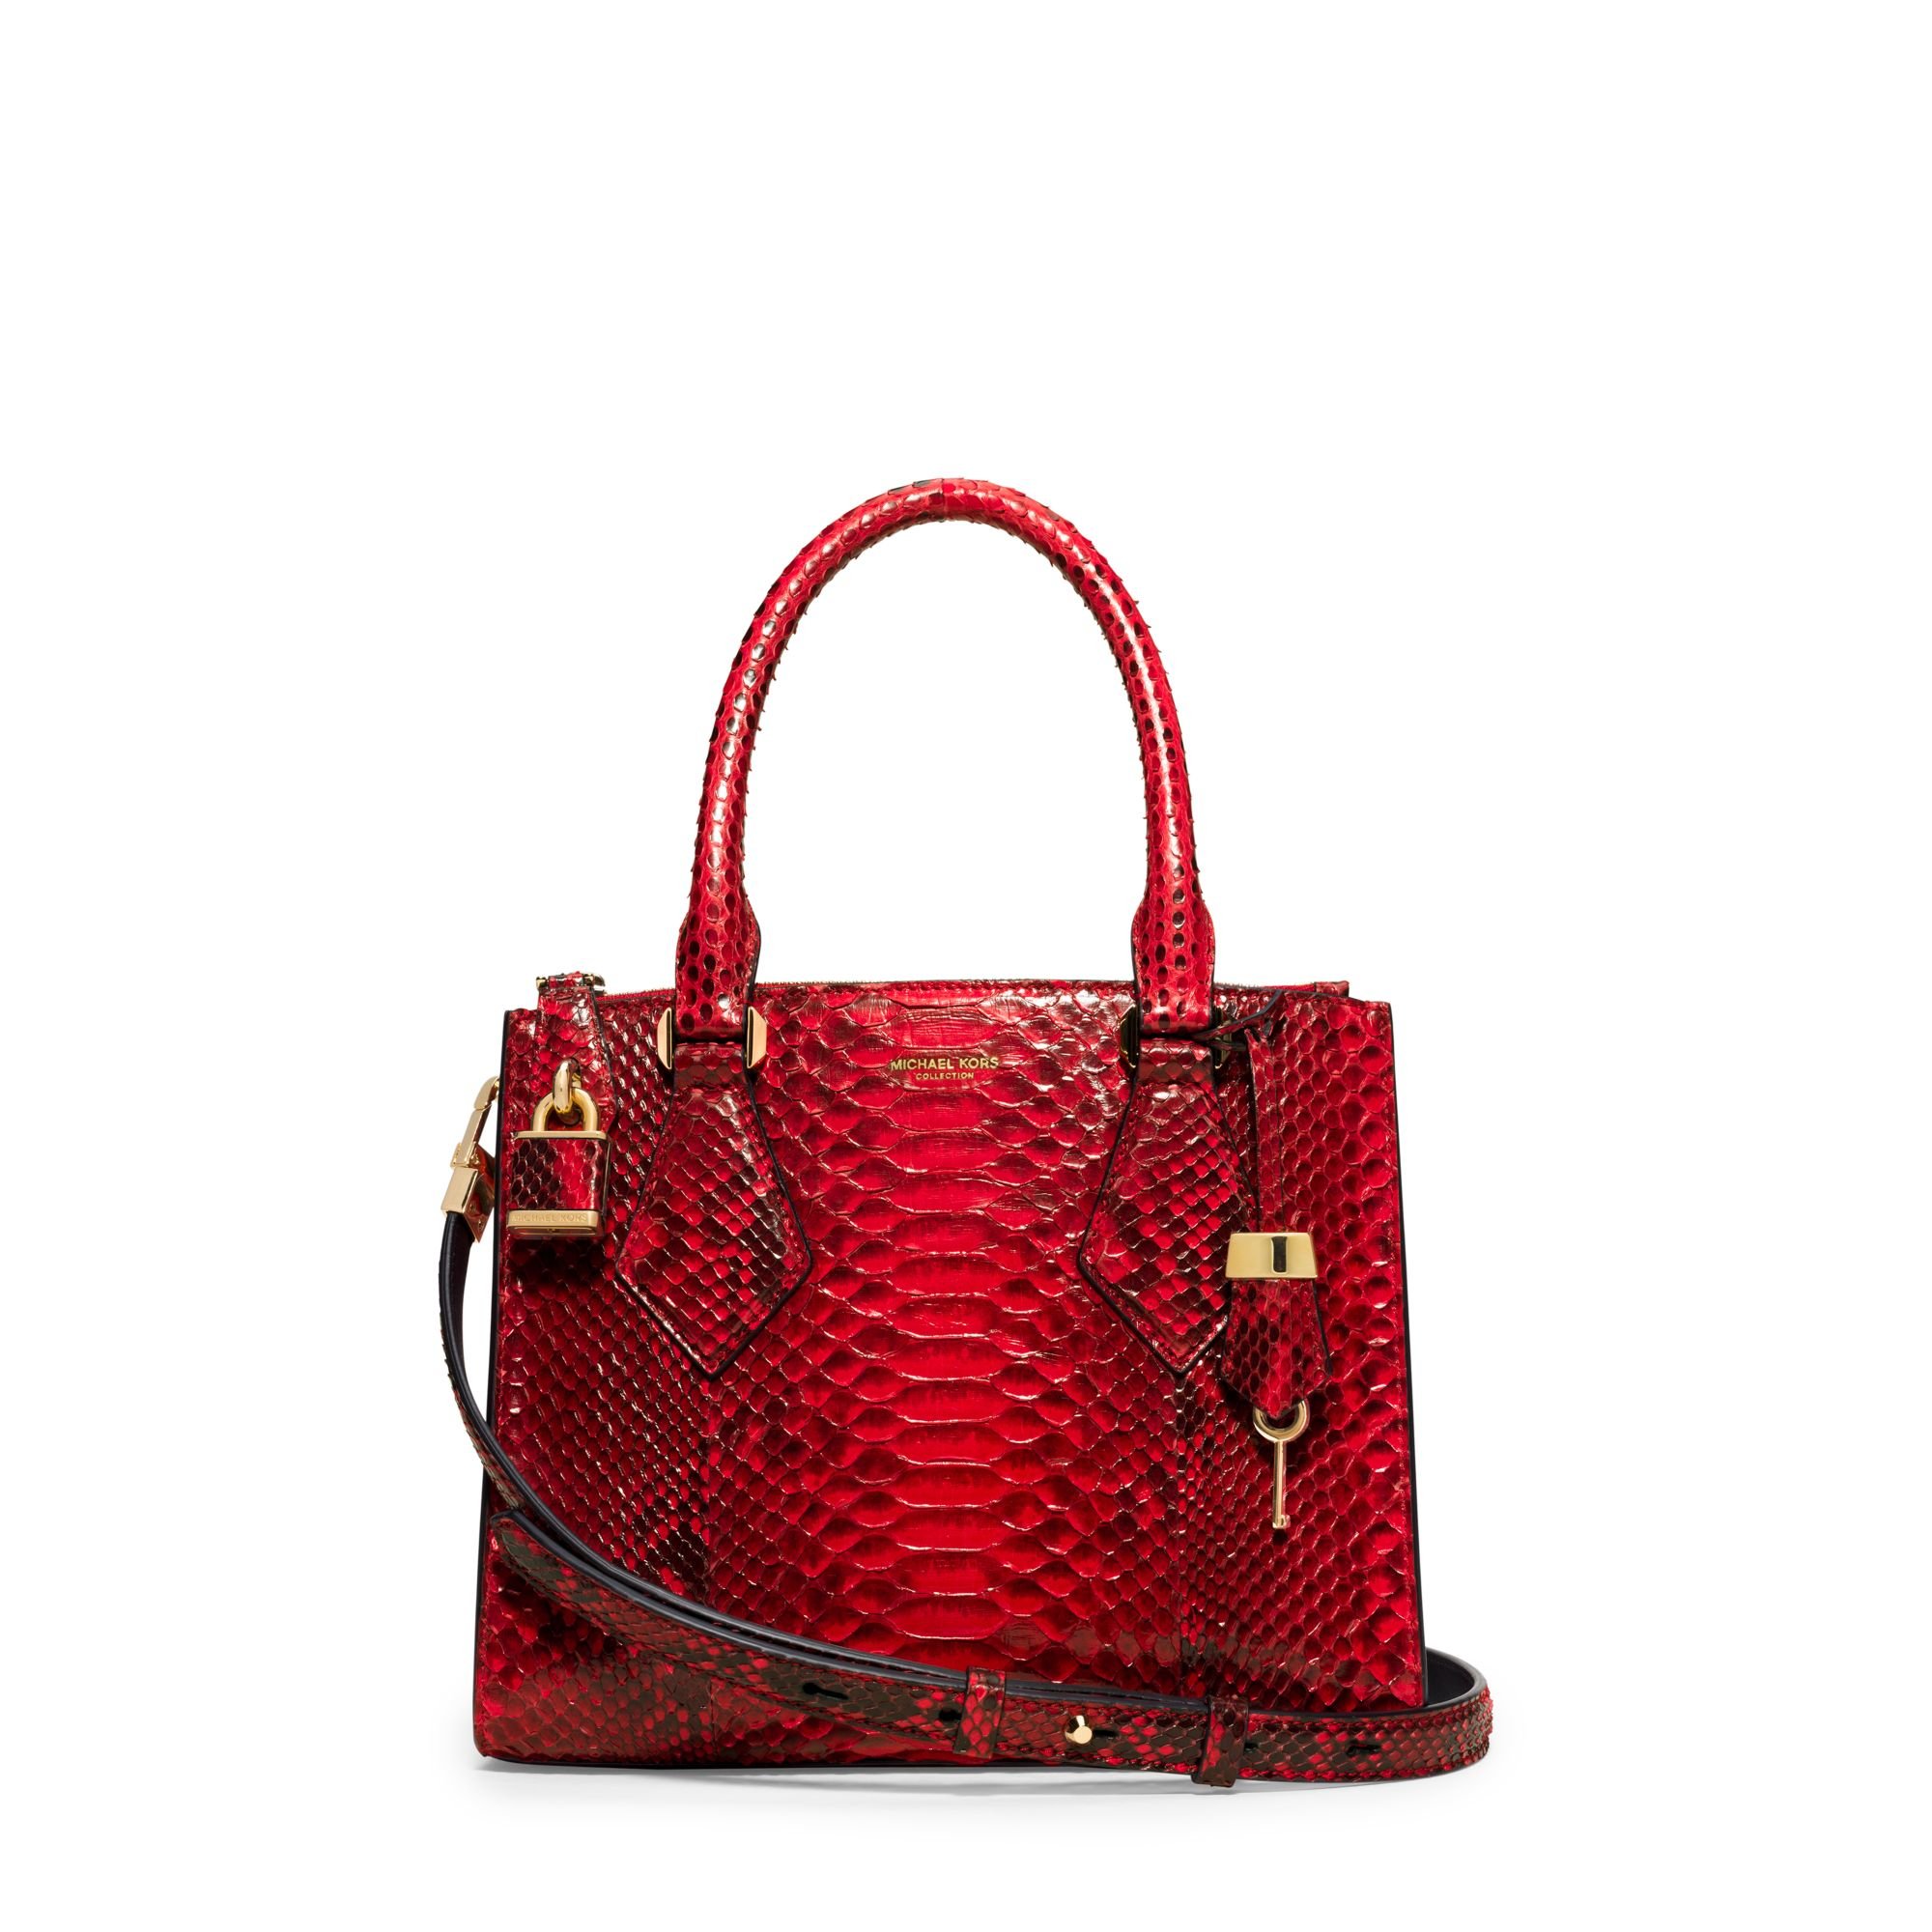 Michael kors Casey Small Python Satchel in Red | Lyst